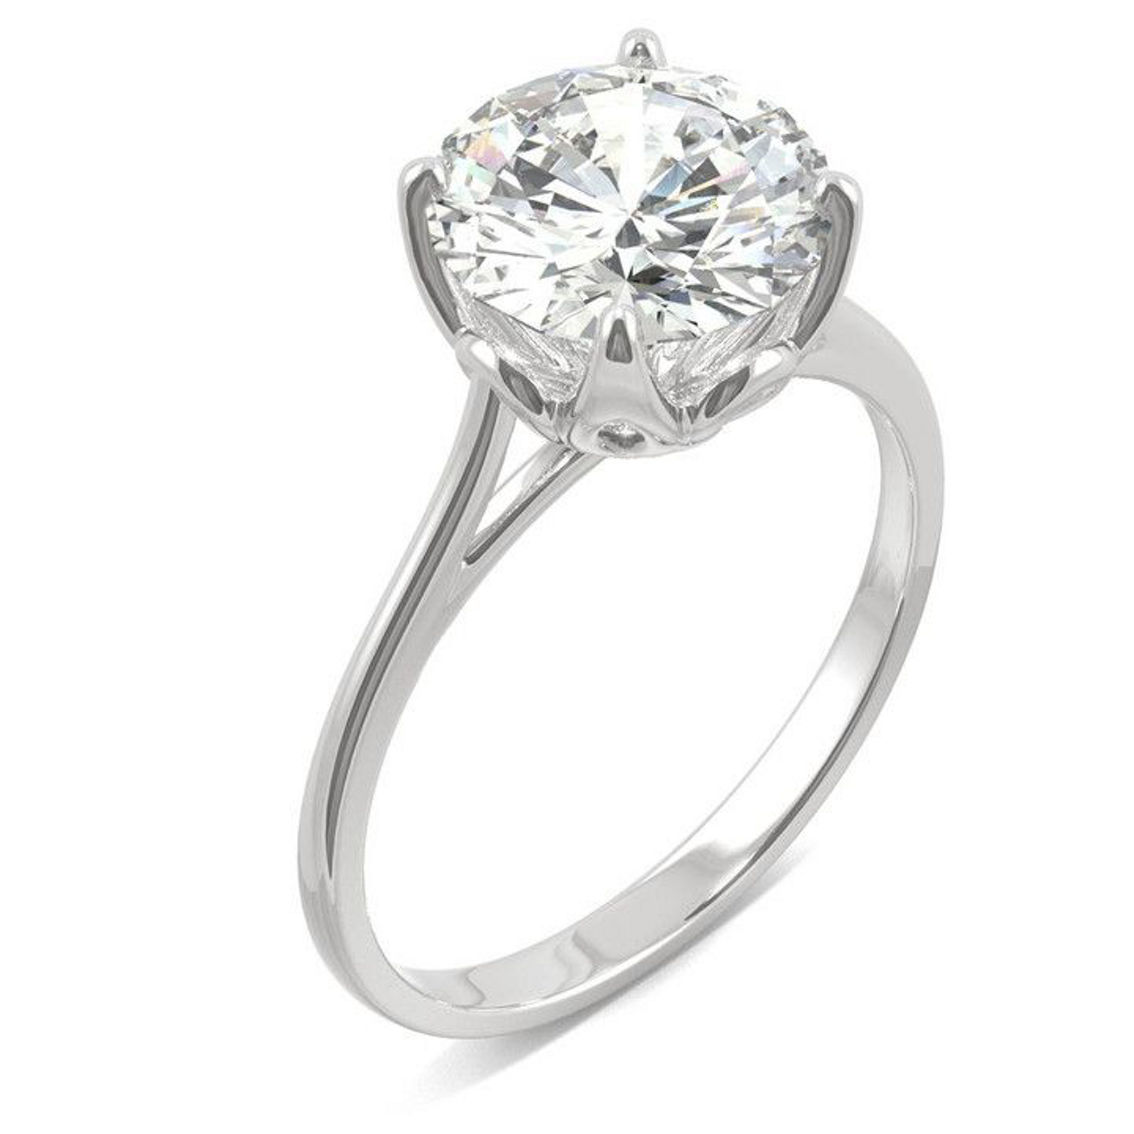 Charles & Colvard 2.70cttw Moissanite Solitaire Engagement Ring in 14k White Gold - Image 2 of 5